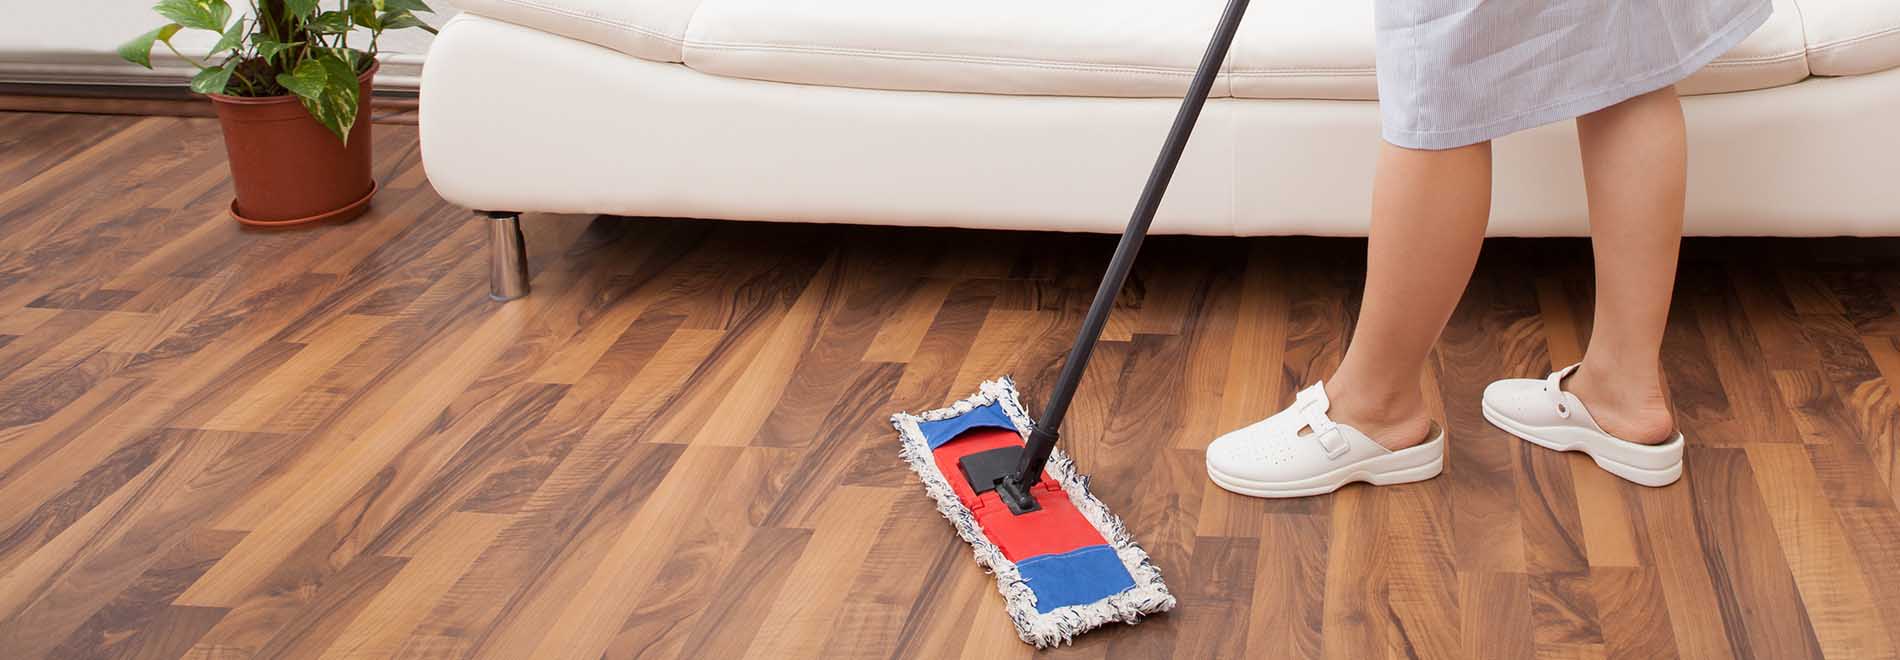 Carpet Cleaners Putney